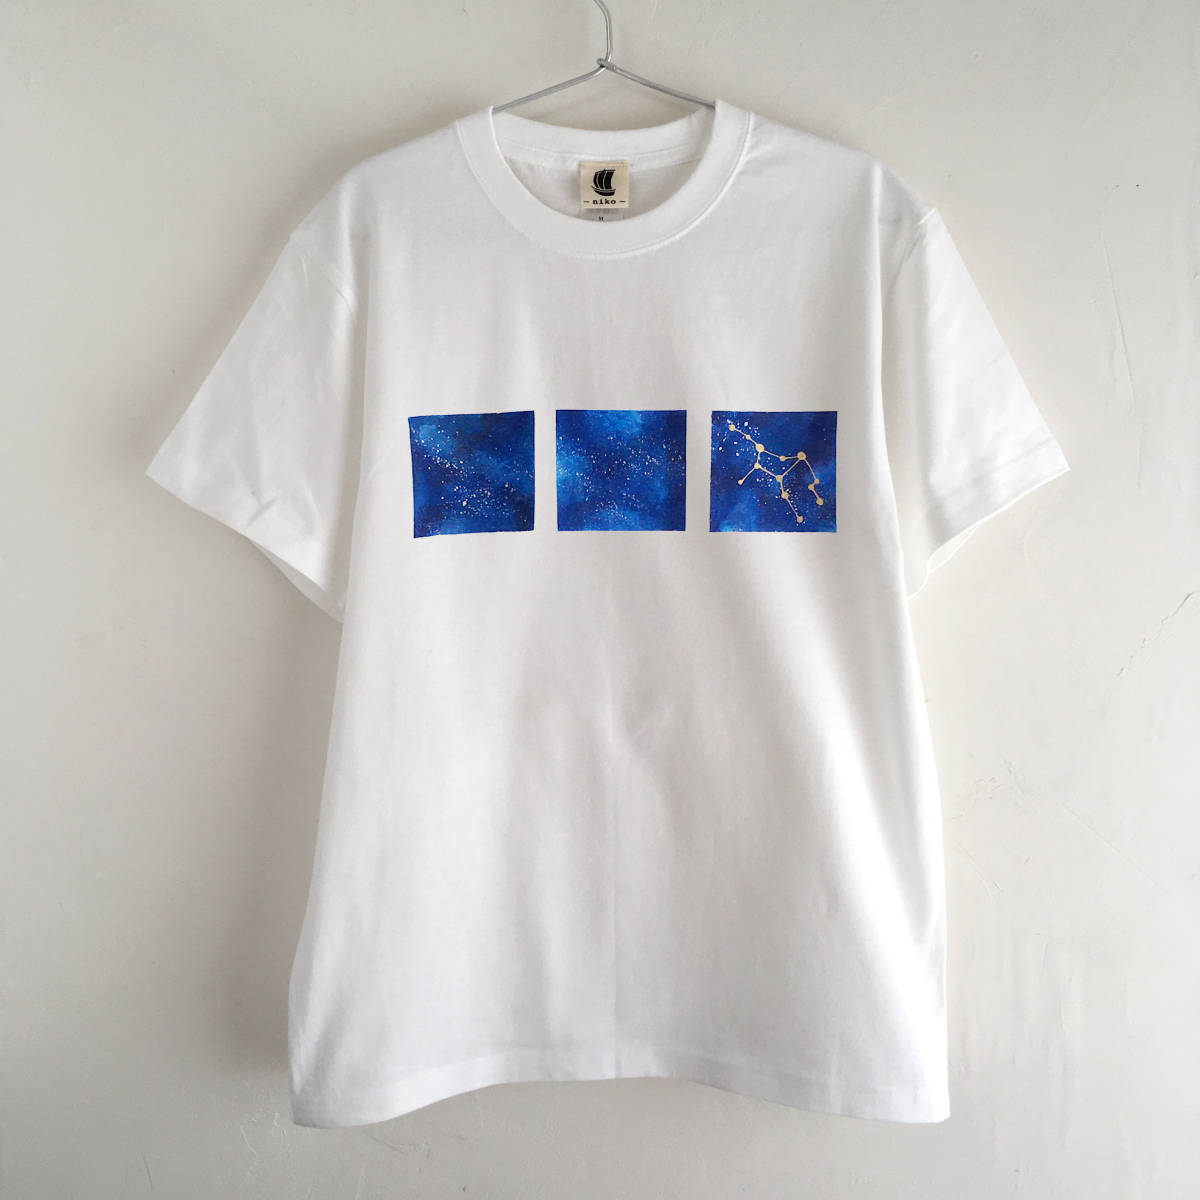 Hand-drawn space pattern T-shirt with 12 constellations to choose from, white, M size, galaxy, starry sky, M size, round neck, patterned